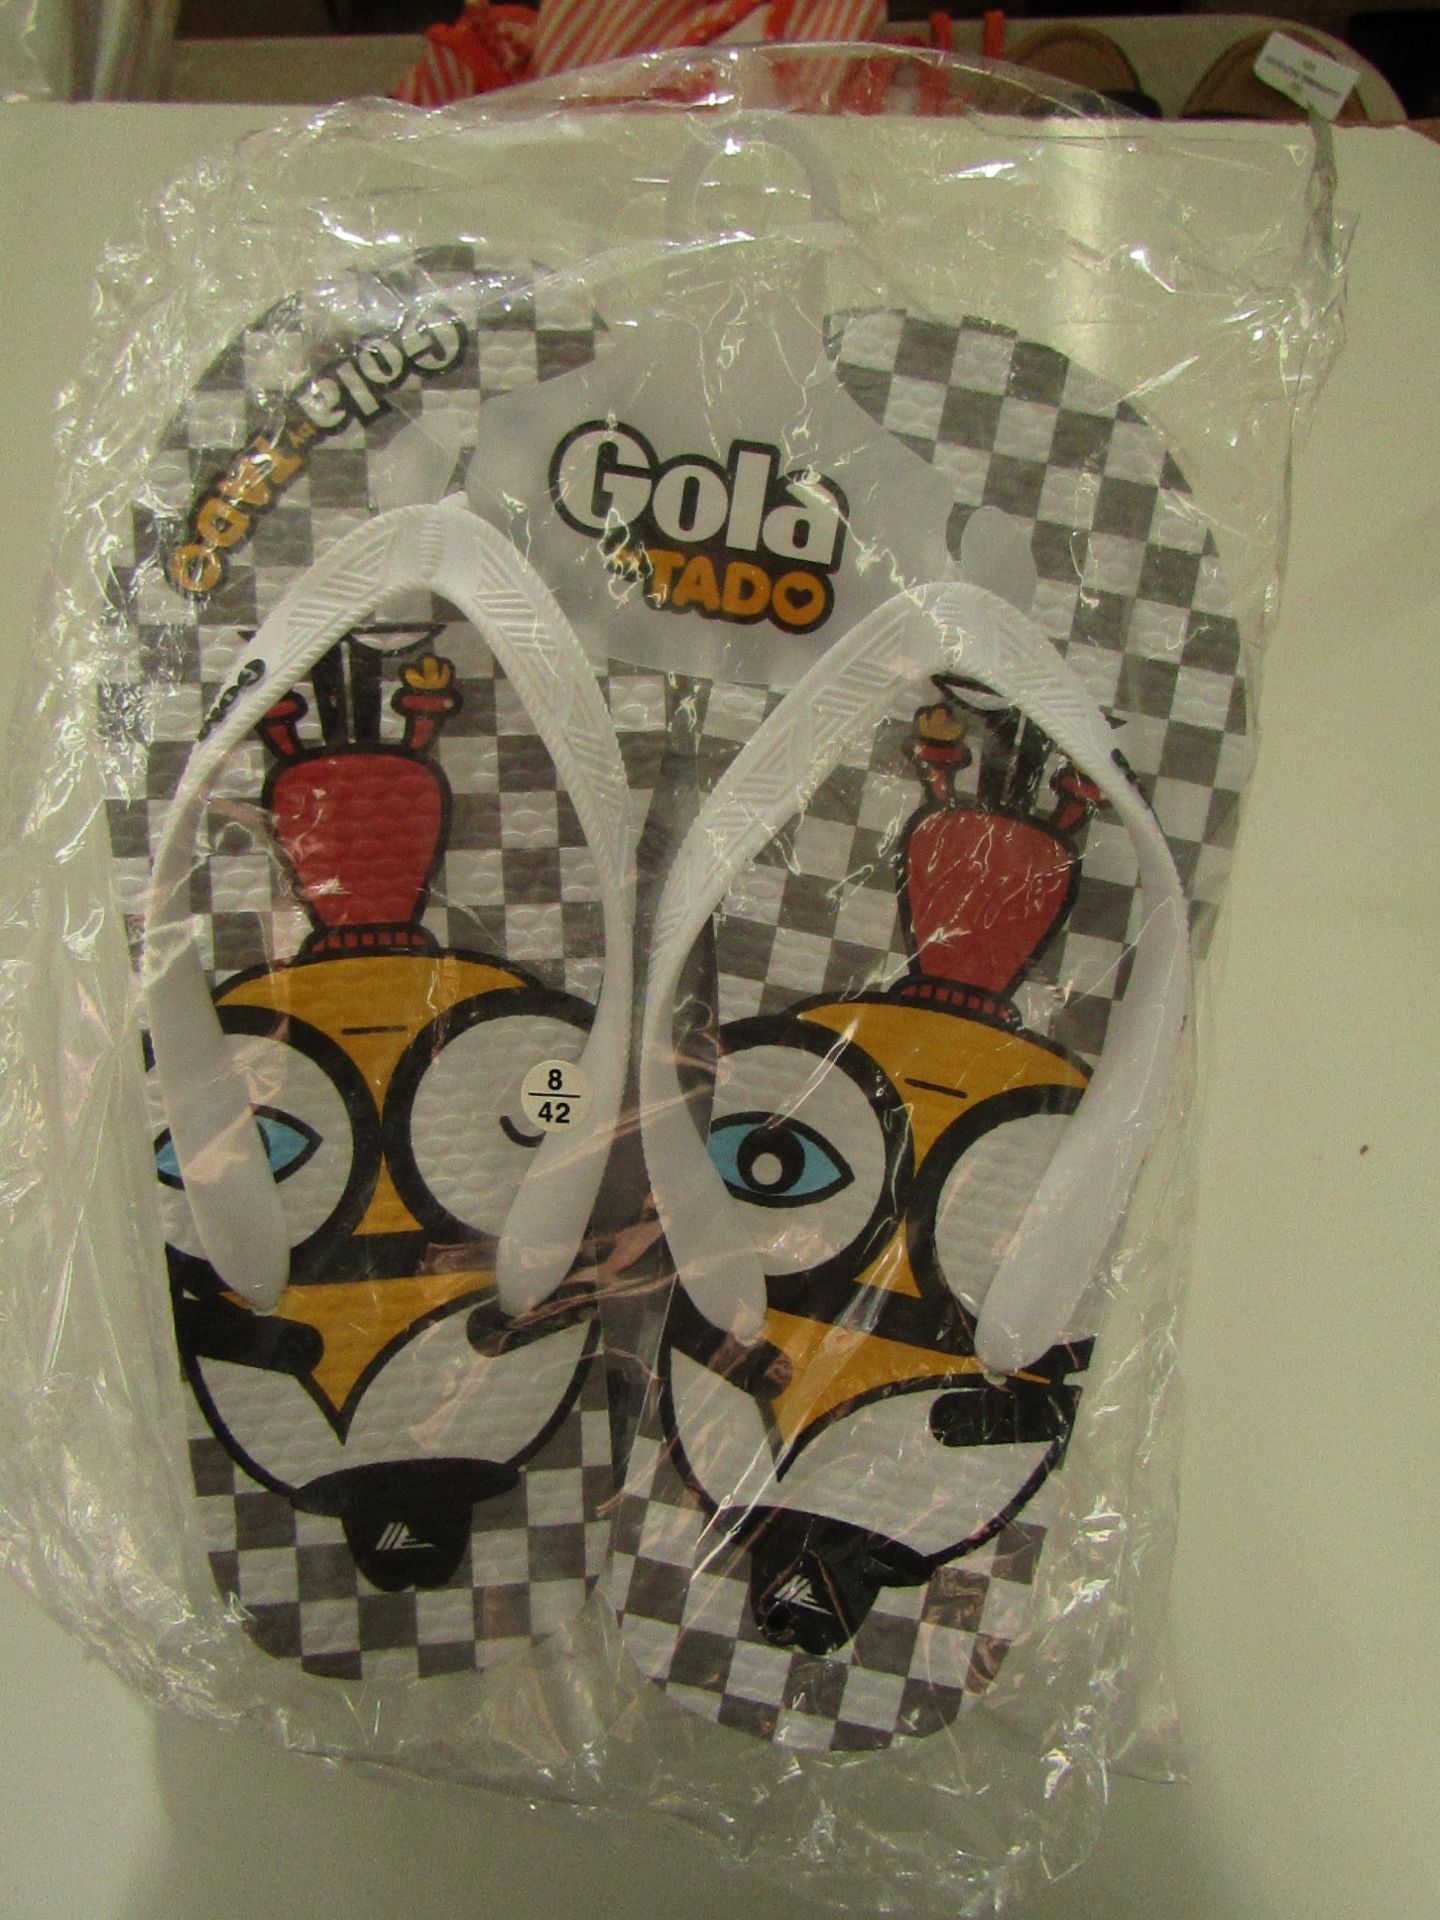 5 X Pairs of Gola Tado FlipFlops All Size 8 All new & Packaged